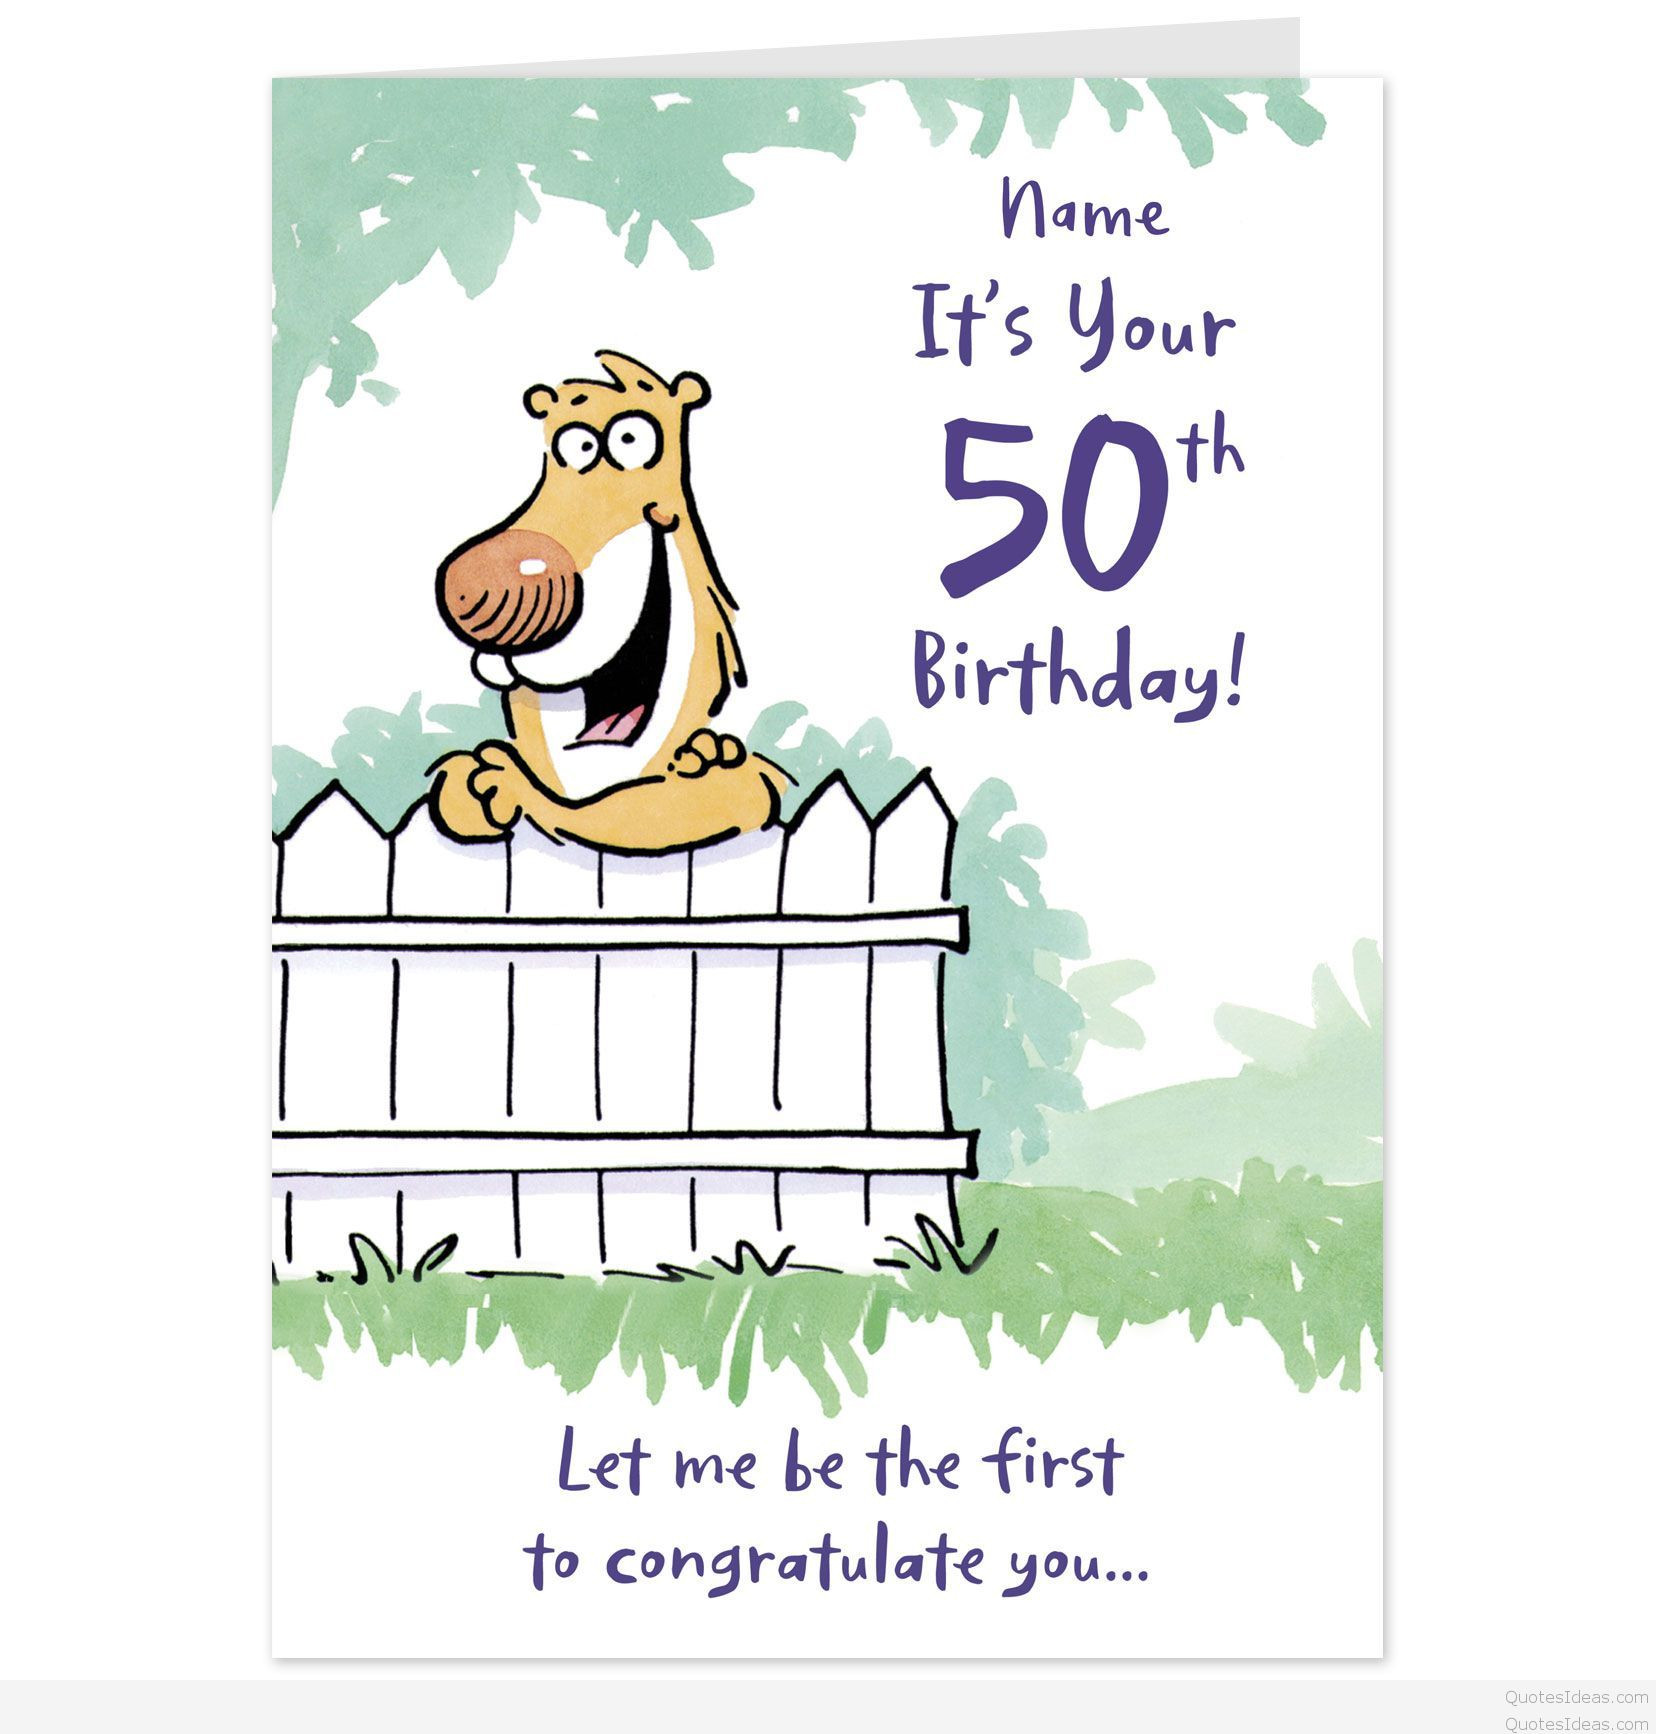 Funny Birthday Cards For Him
 Latest funny cards quotes and sayings